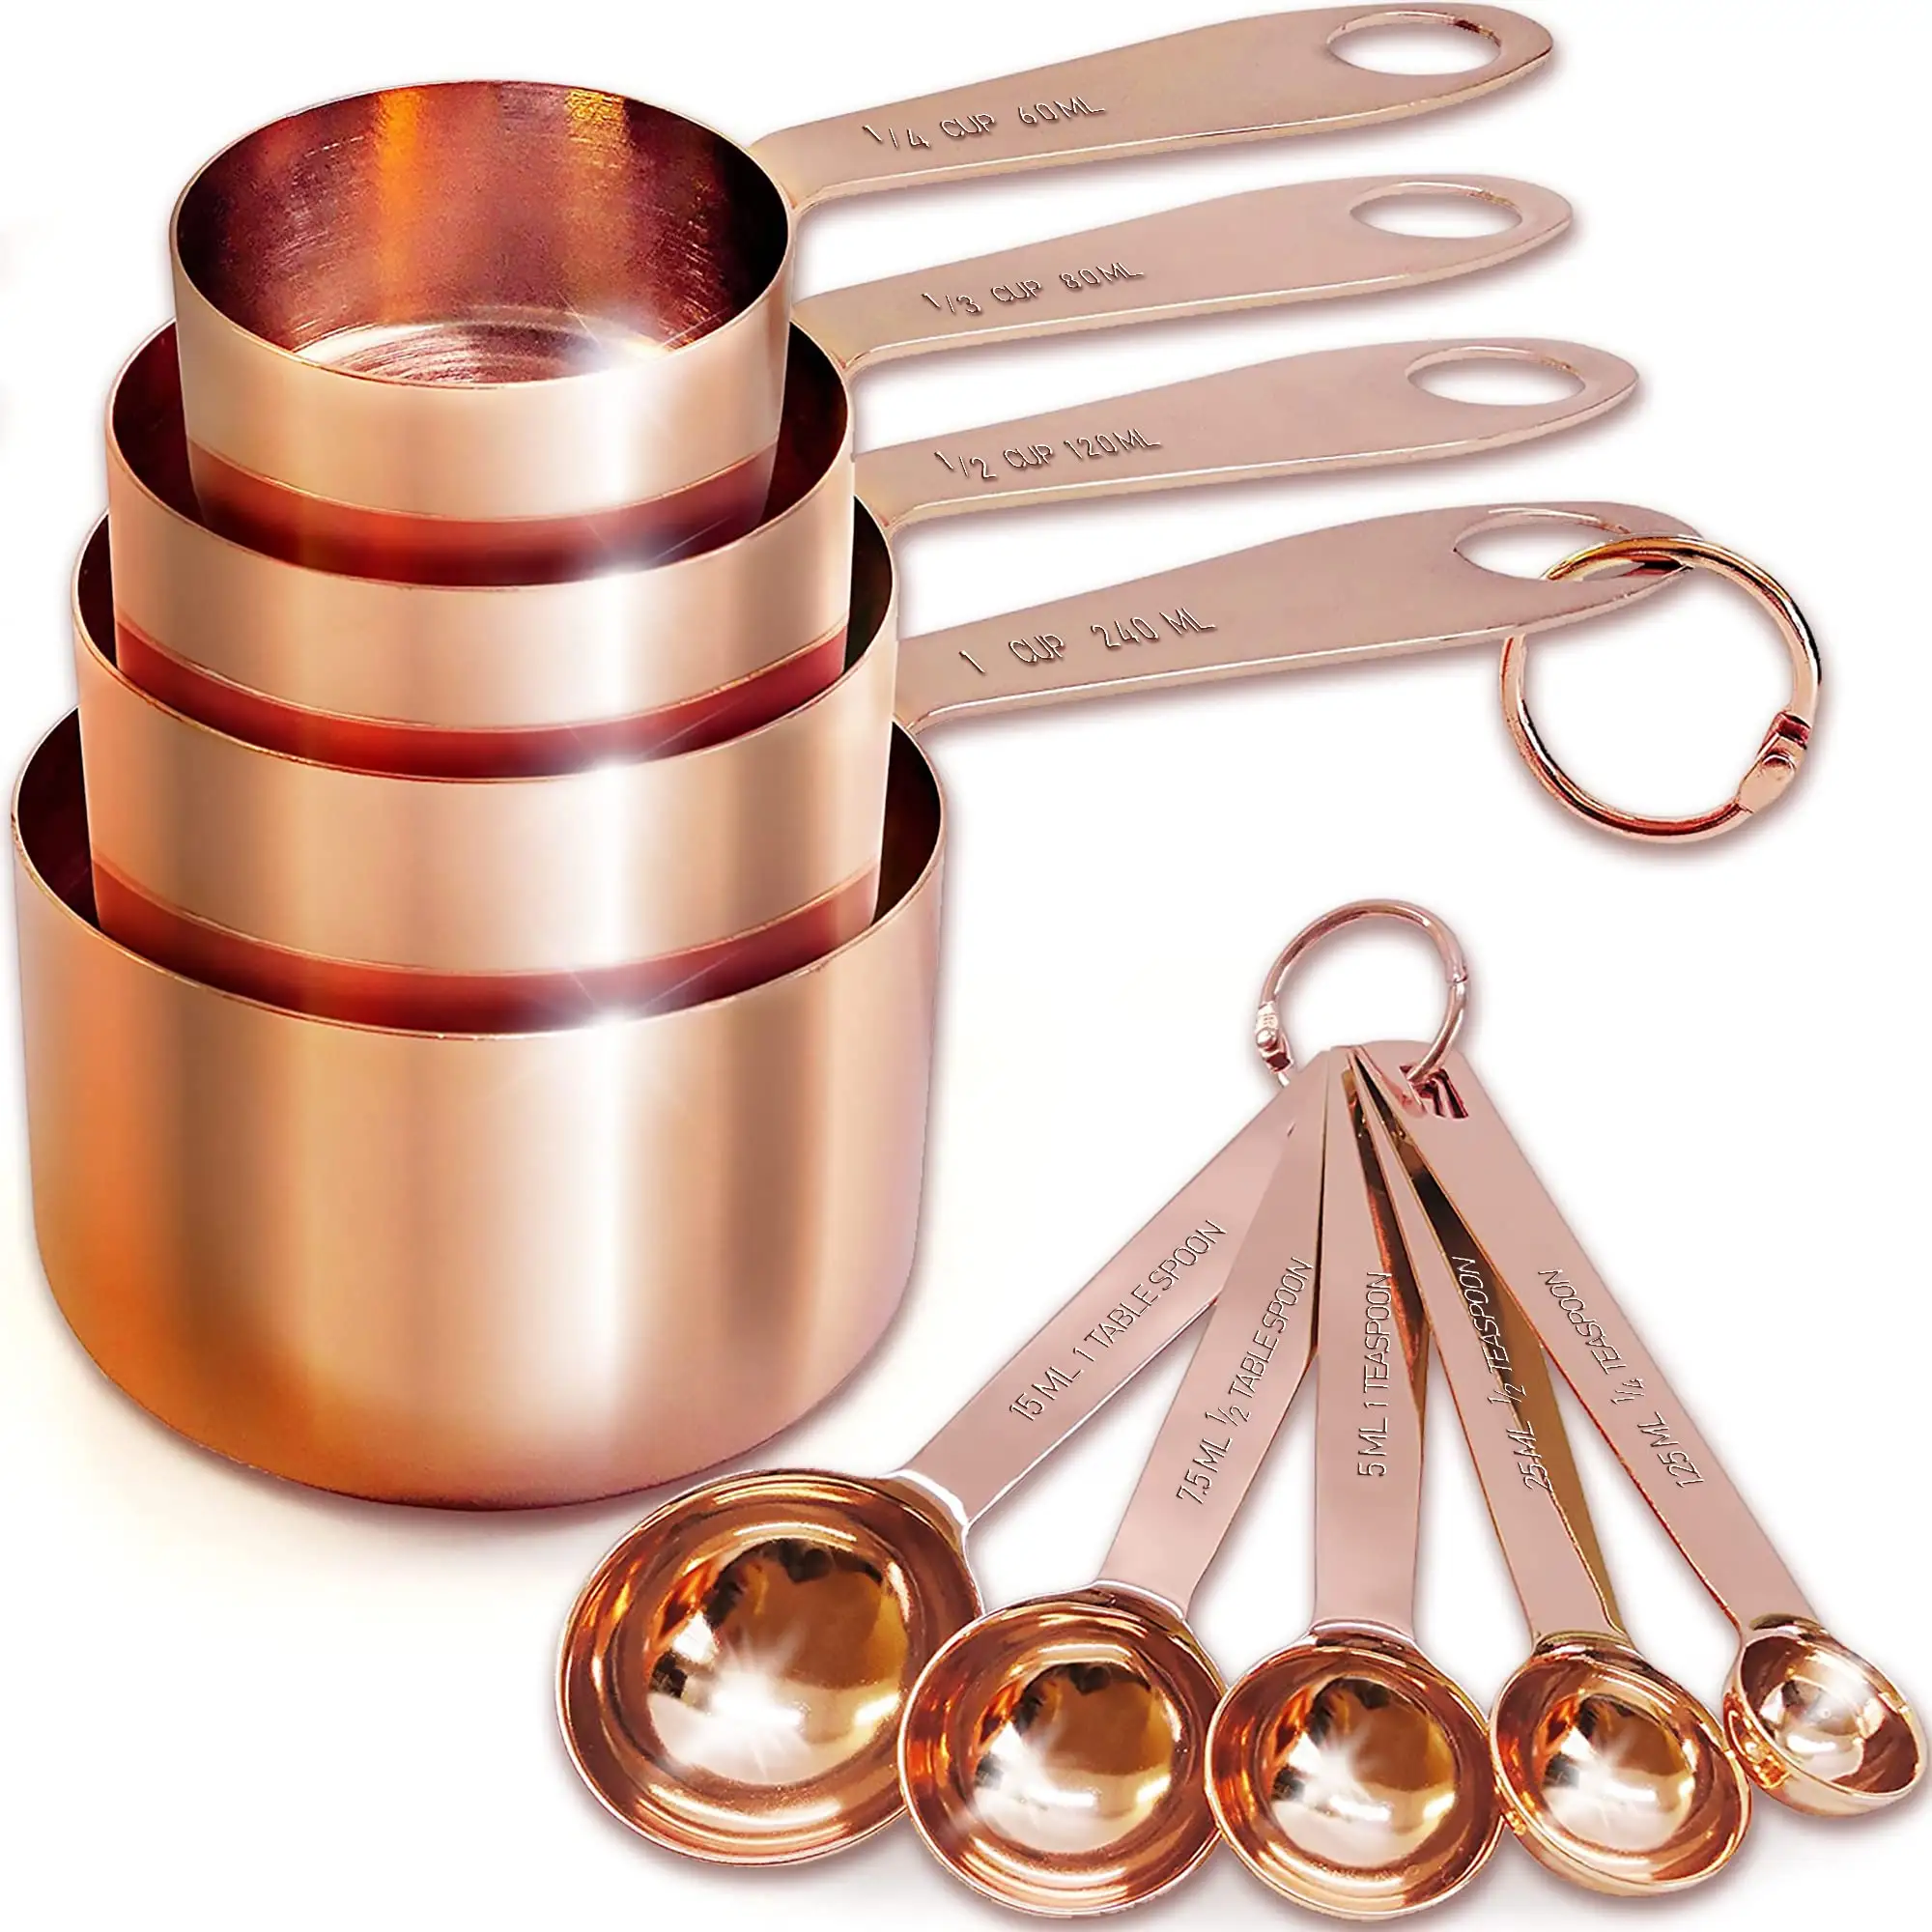 Stainless Steel Rose Gold Copper Measuring Cups and Spoons Set Measuring Spoon Salt Measuring Tool